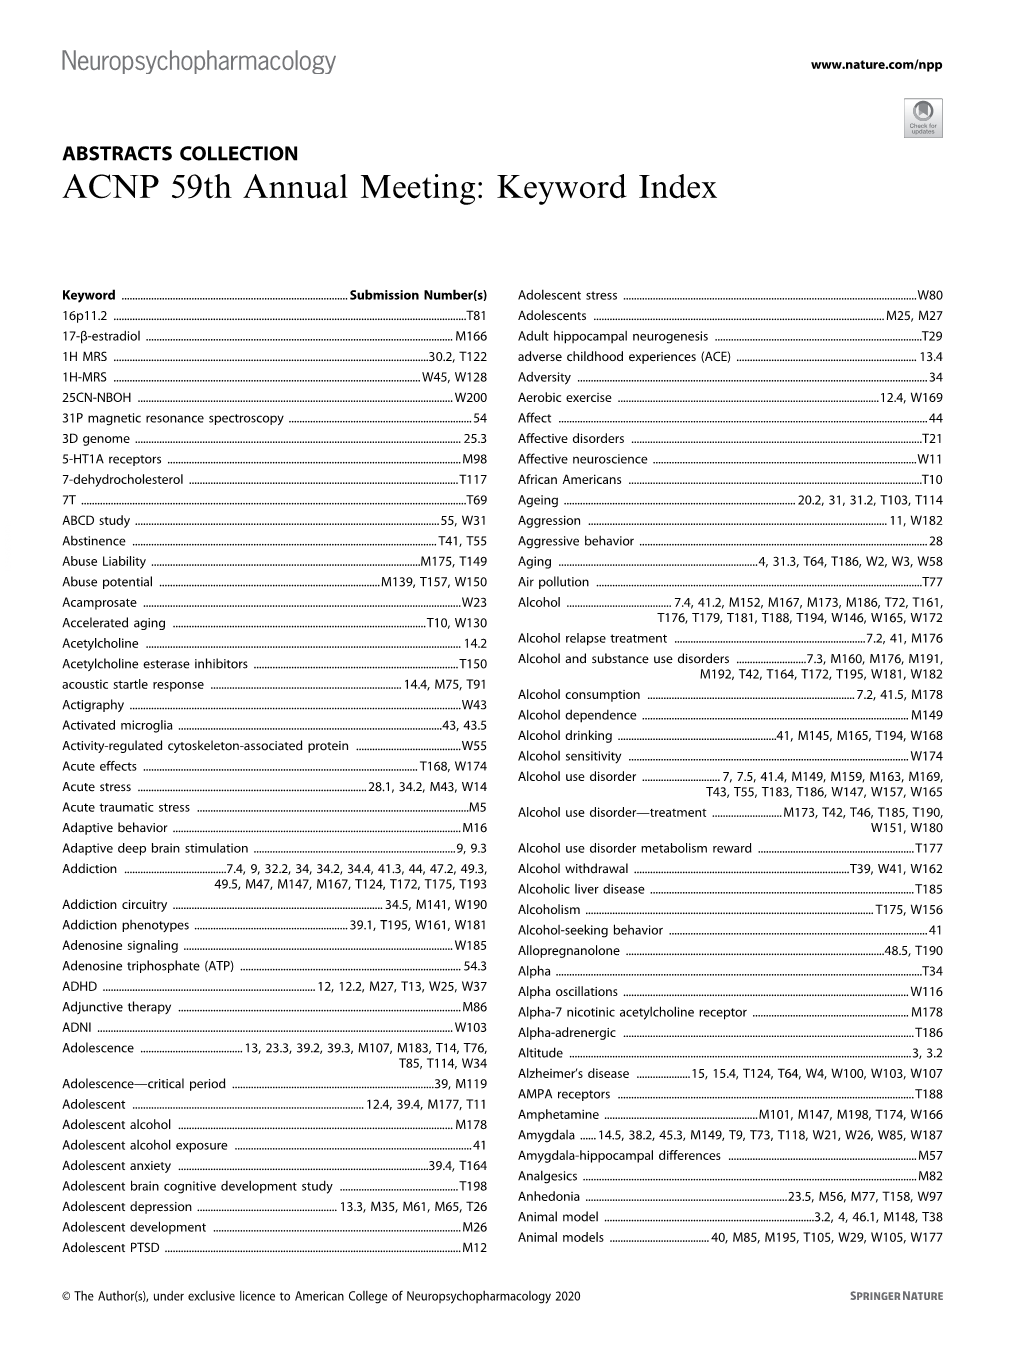 ACNP 59Th Annual Meeting: Keyword Index